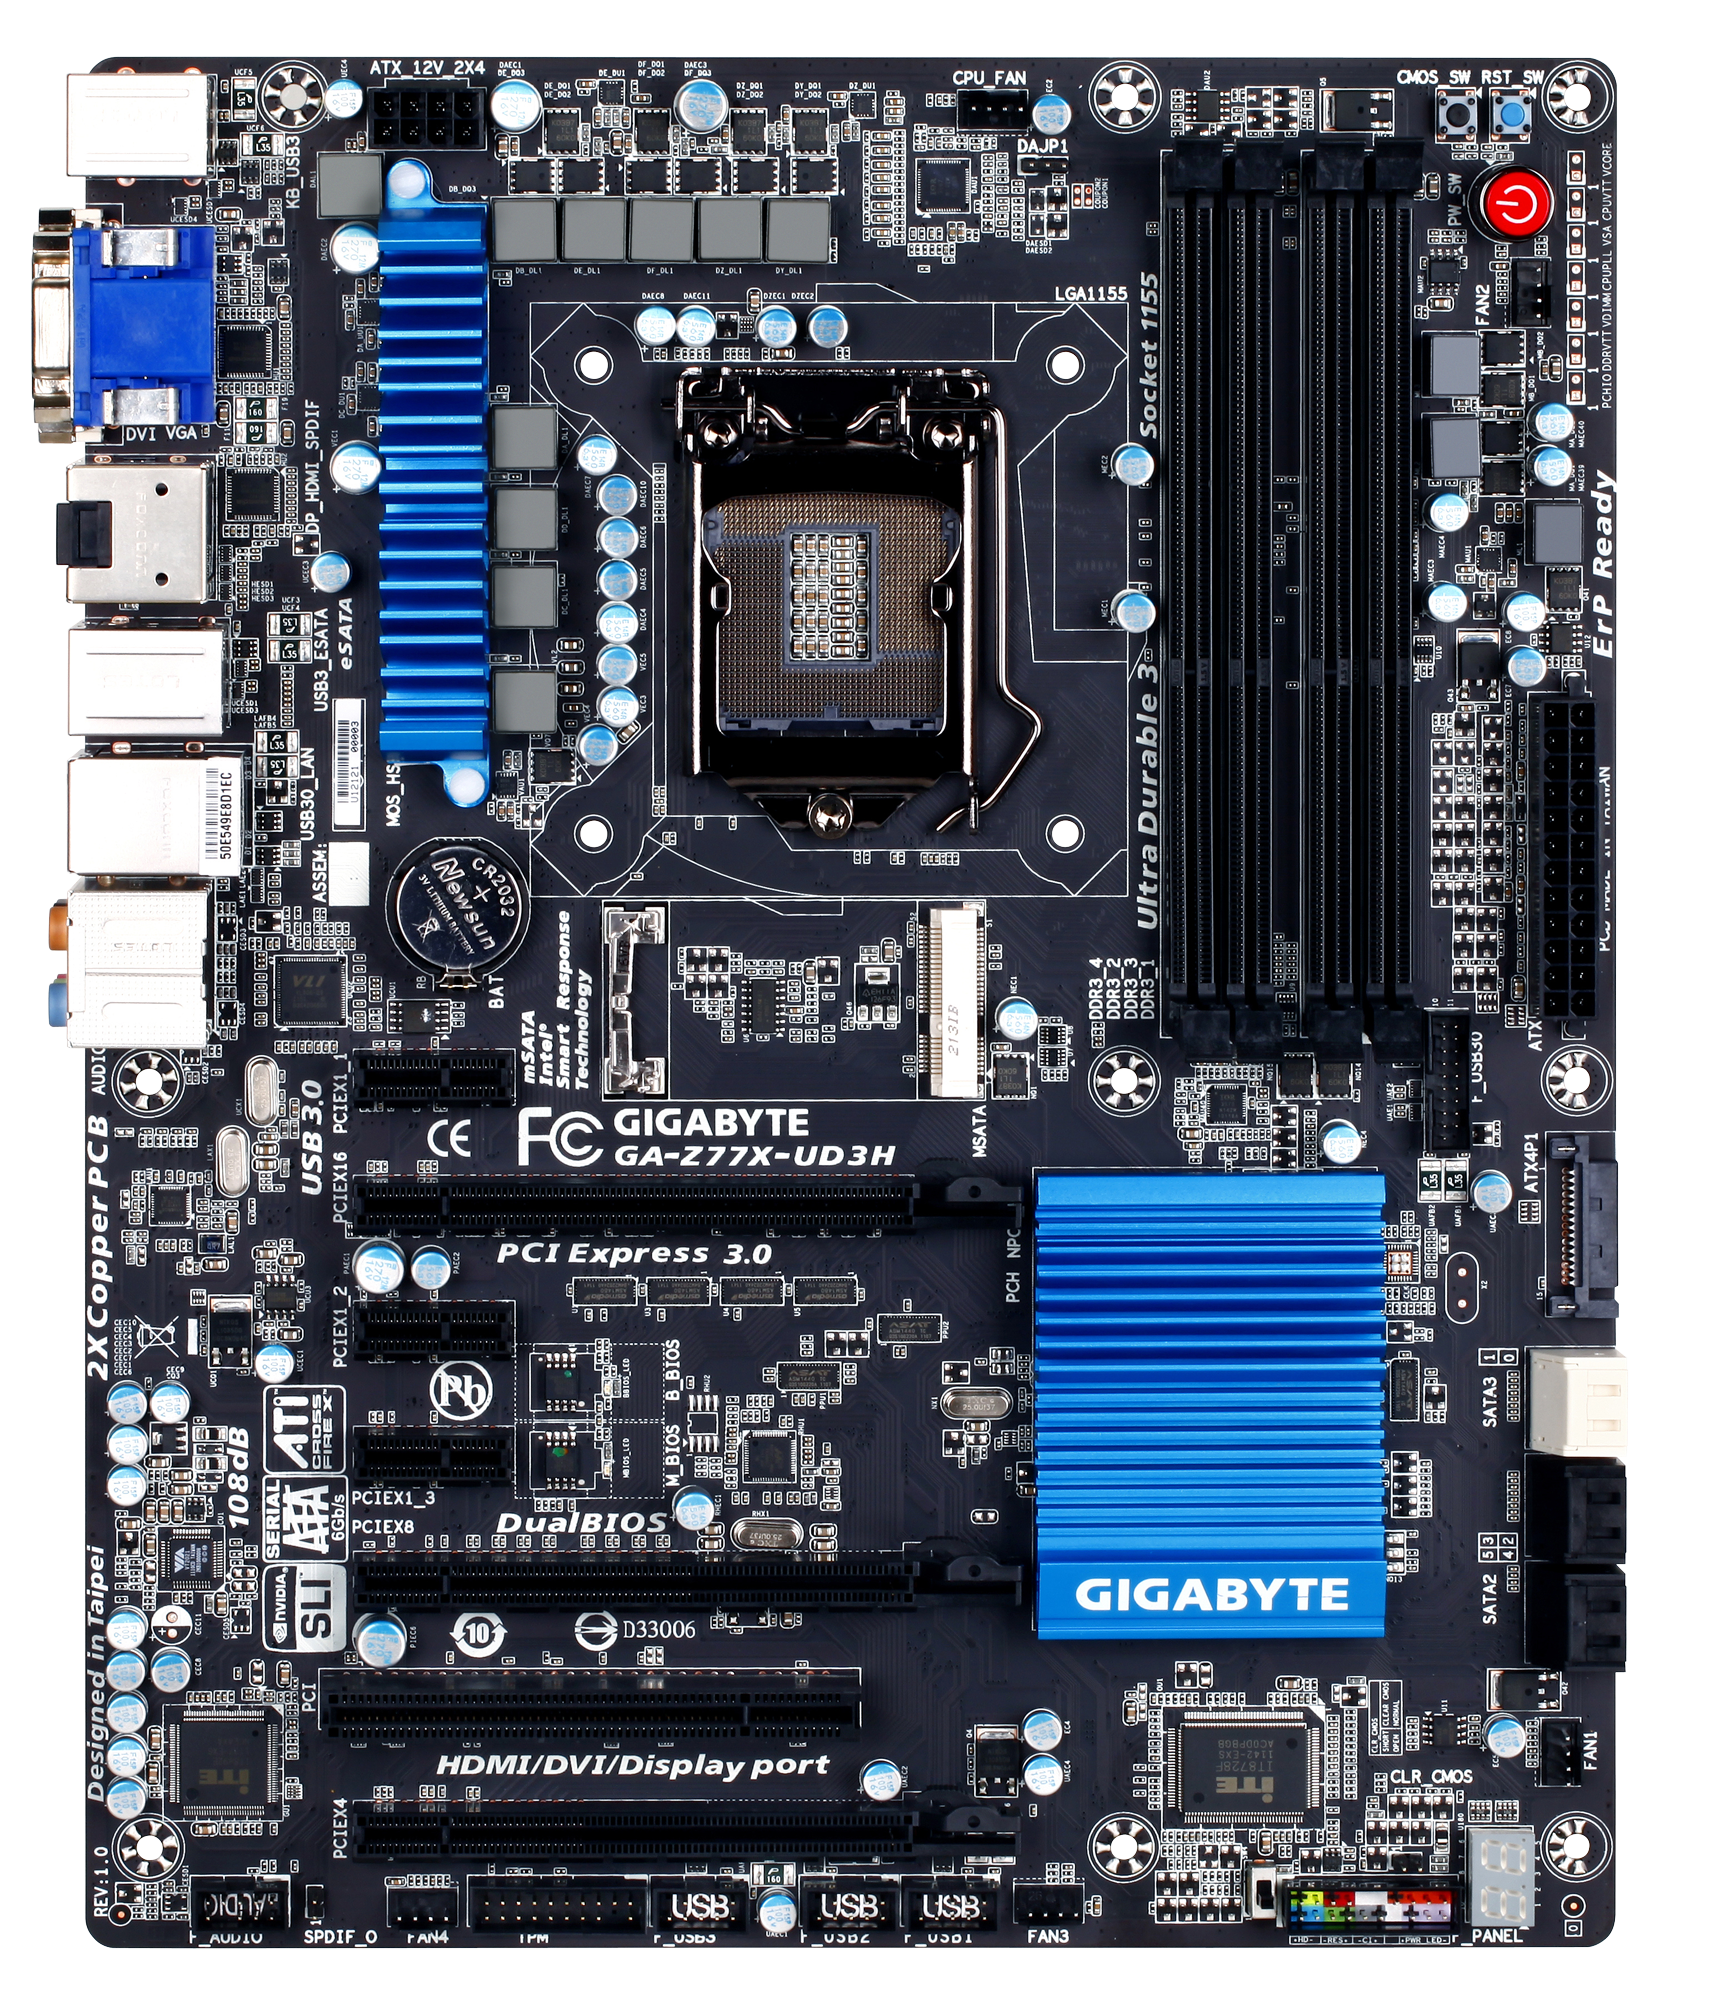 Gigabyte GA-Z77X-UD3H - Overview, Visual Inspection and Board